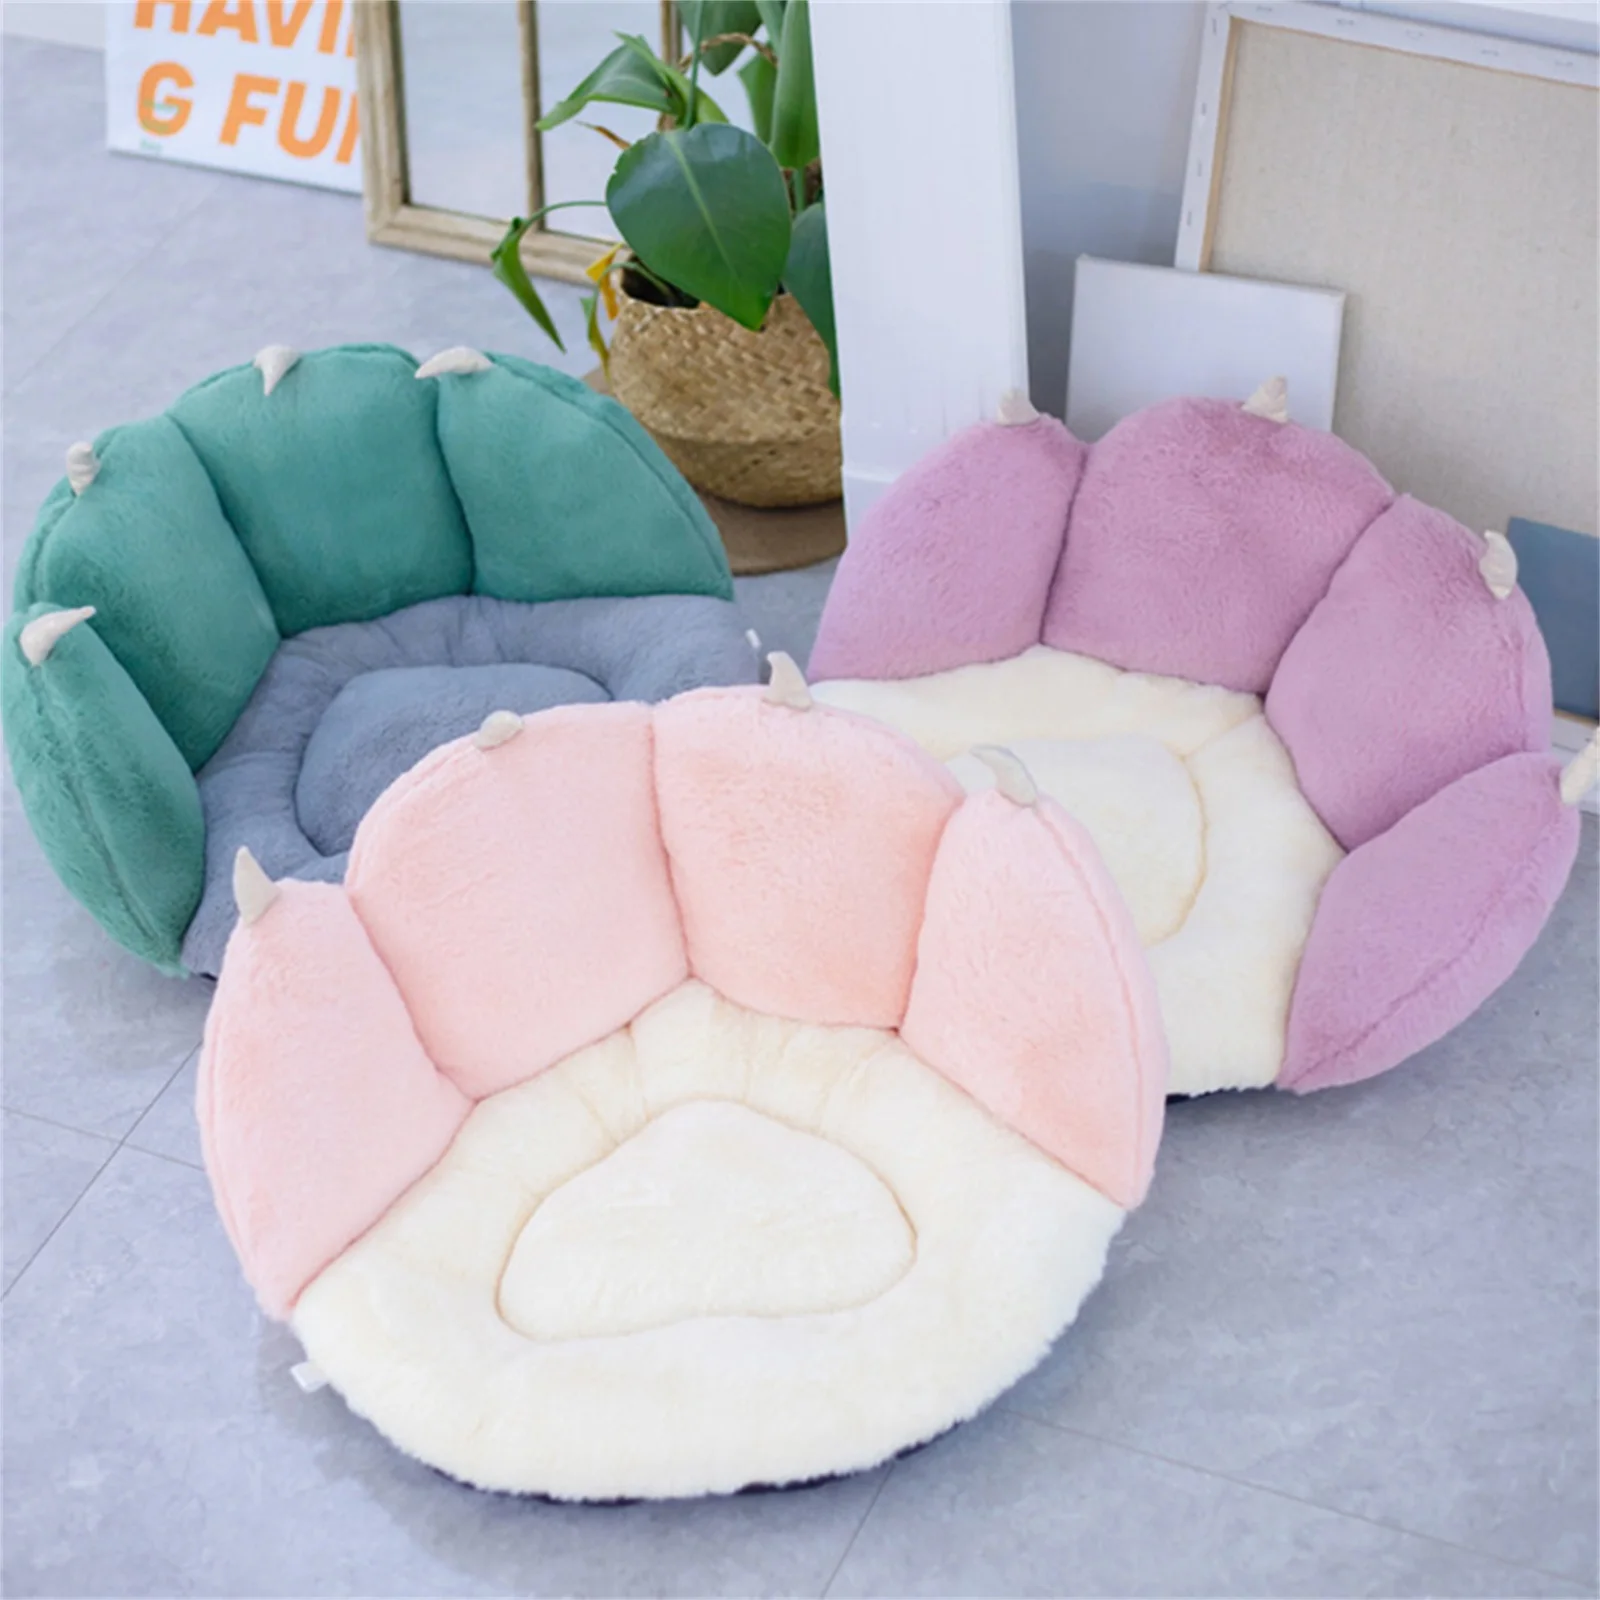 

Simulated Cat Paw-Shaped Seating Cushion, Patchwork Back Support Soft Reading/Lounging Comfy Decor Pads for Carpet, Home